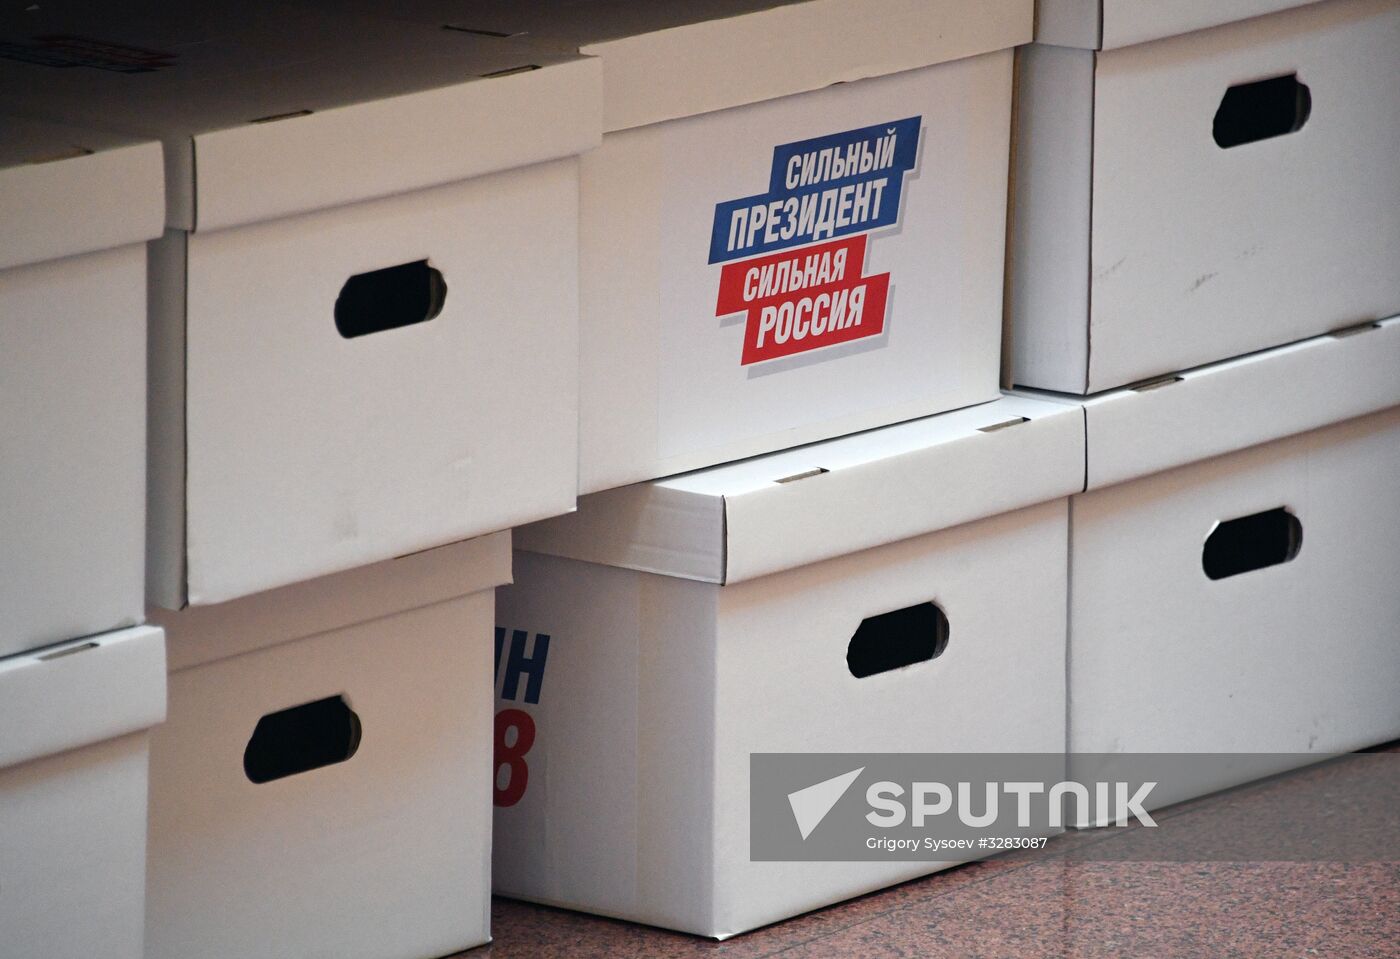 Signatures in support of Vladimir Putin submitted to Central Election Commission of Russian Federation